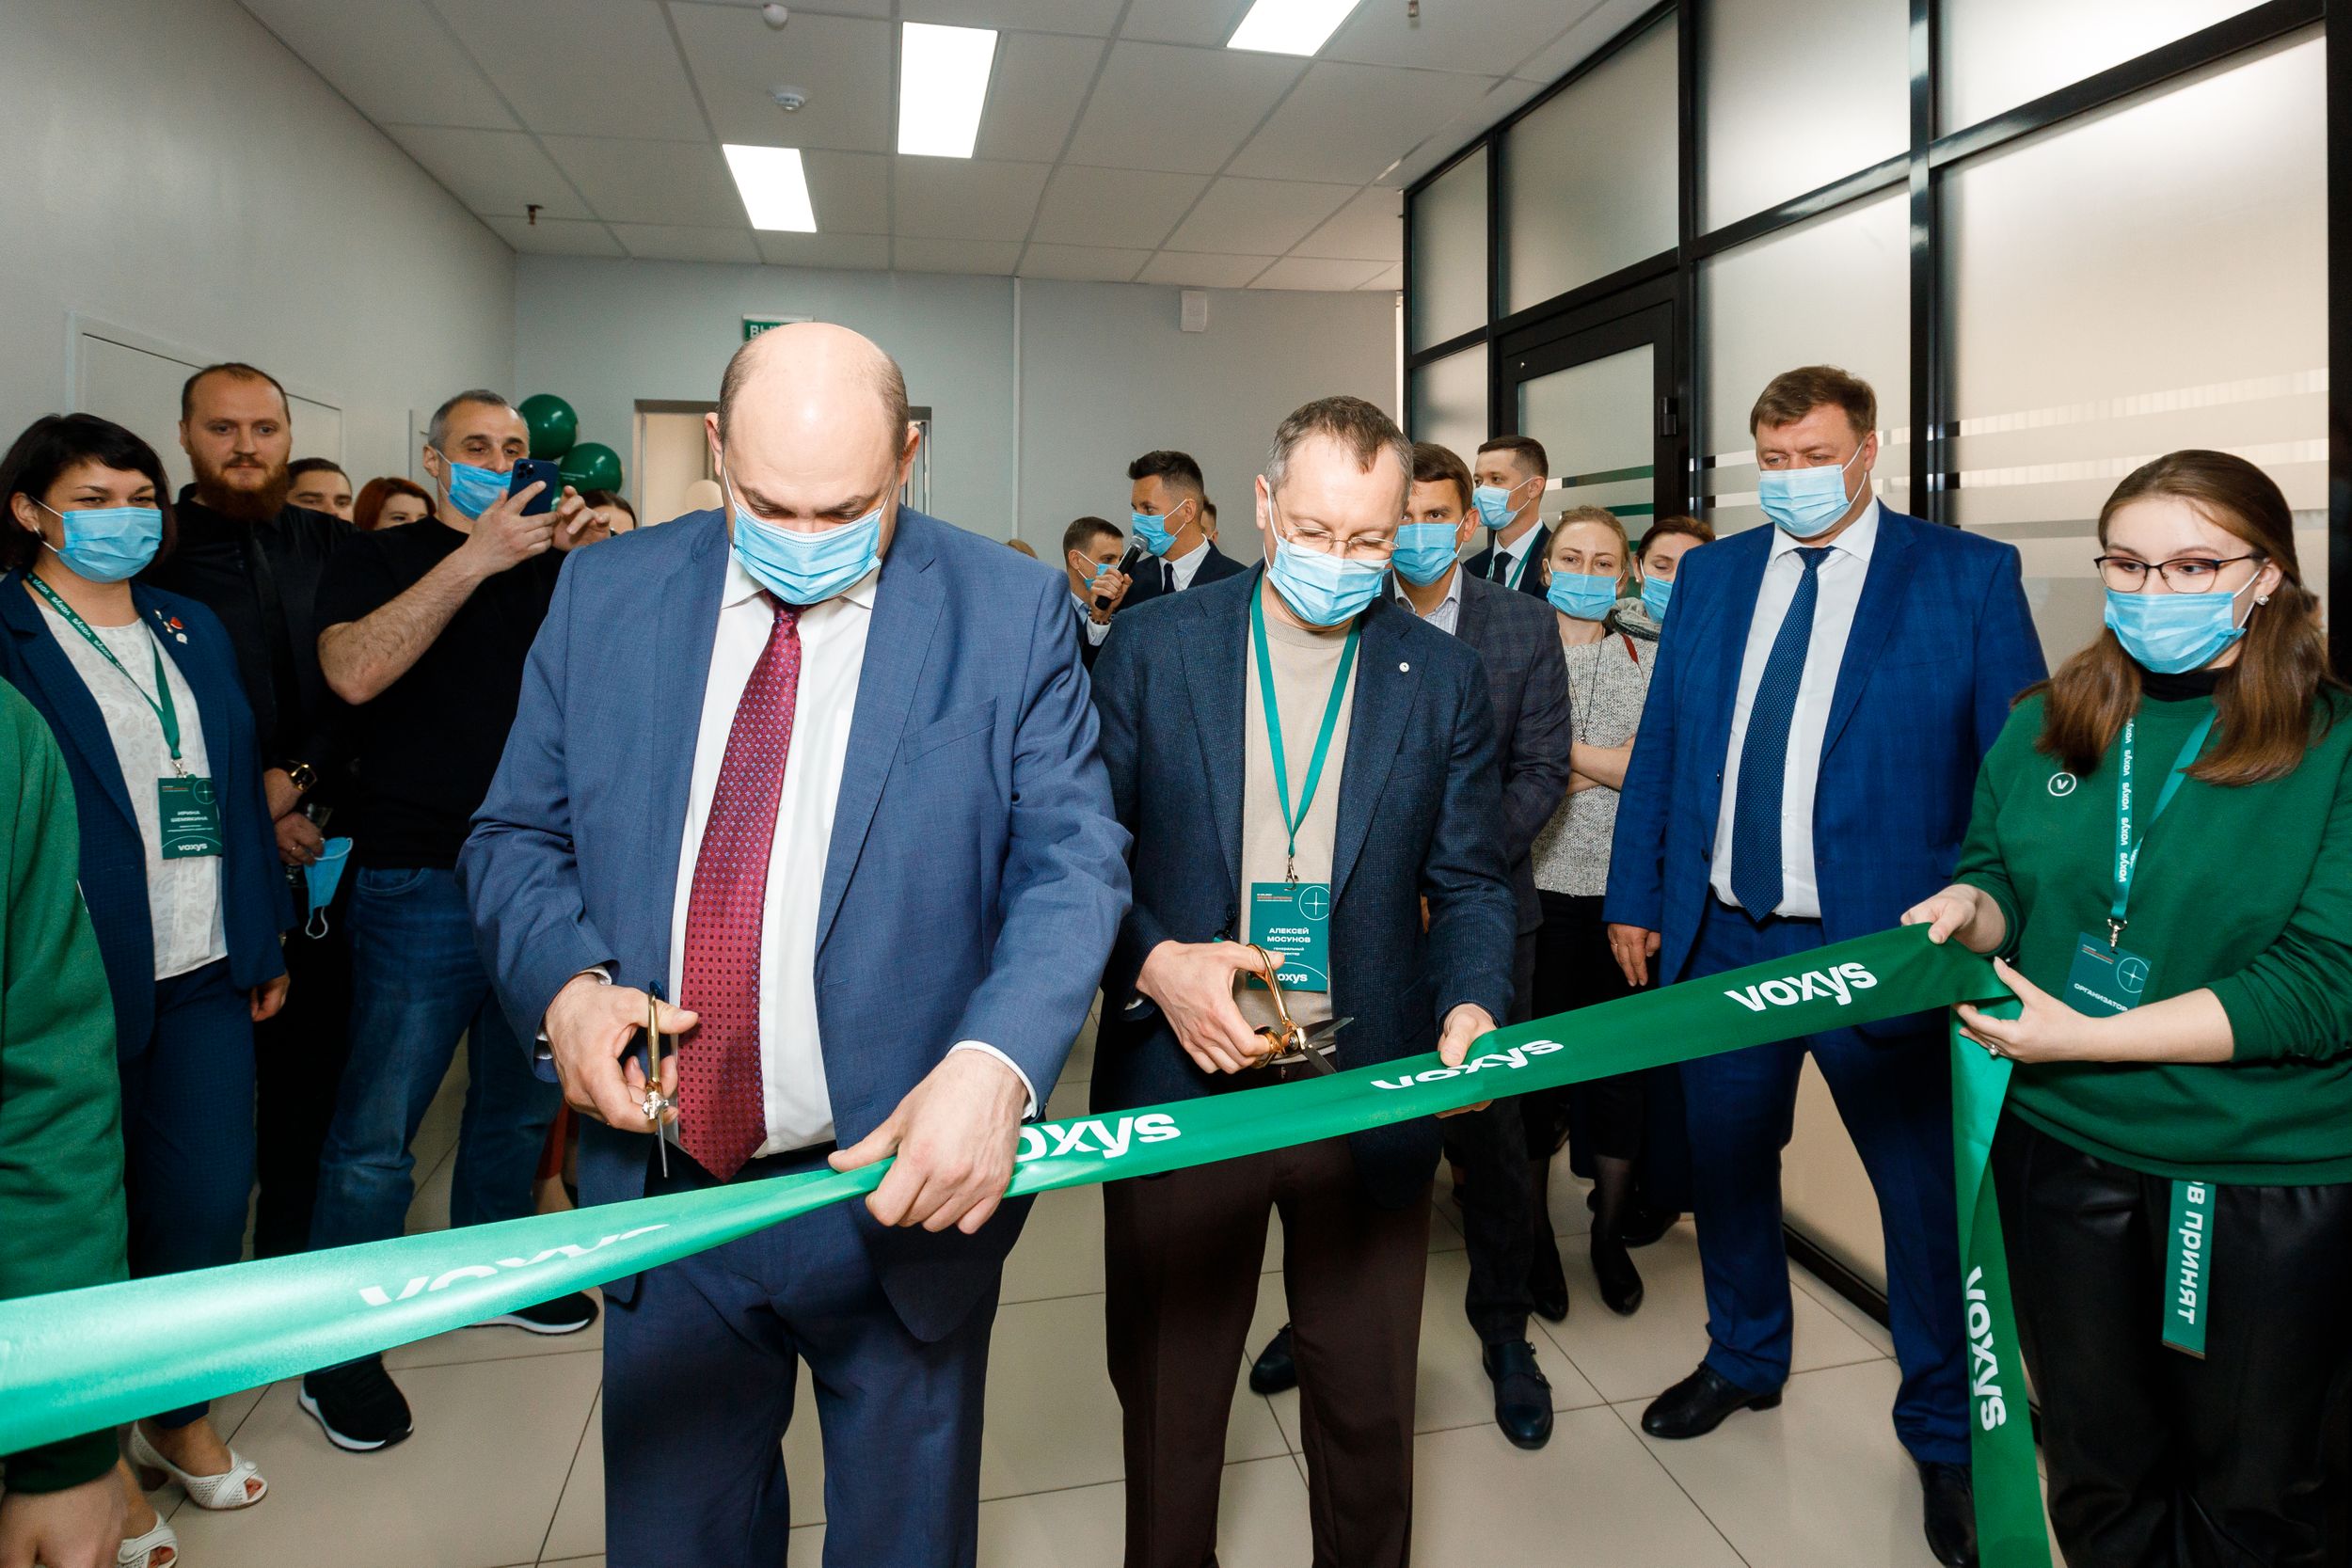 New VOXYS communications center in Kursk: 100+ new jobs per year, human-centric approach and international recognition